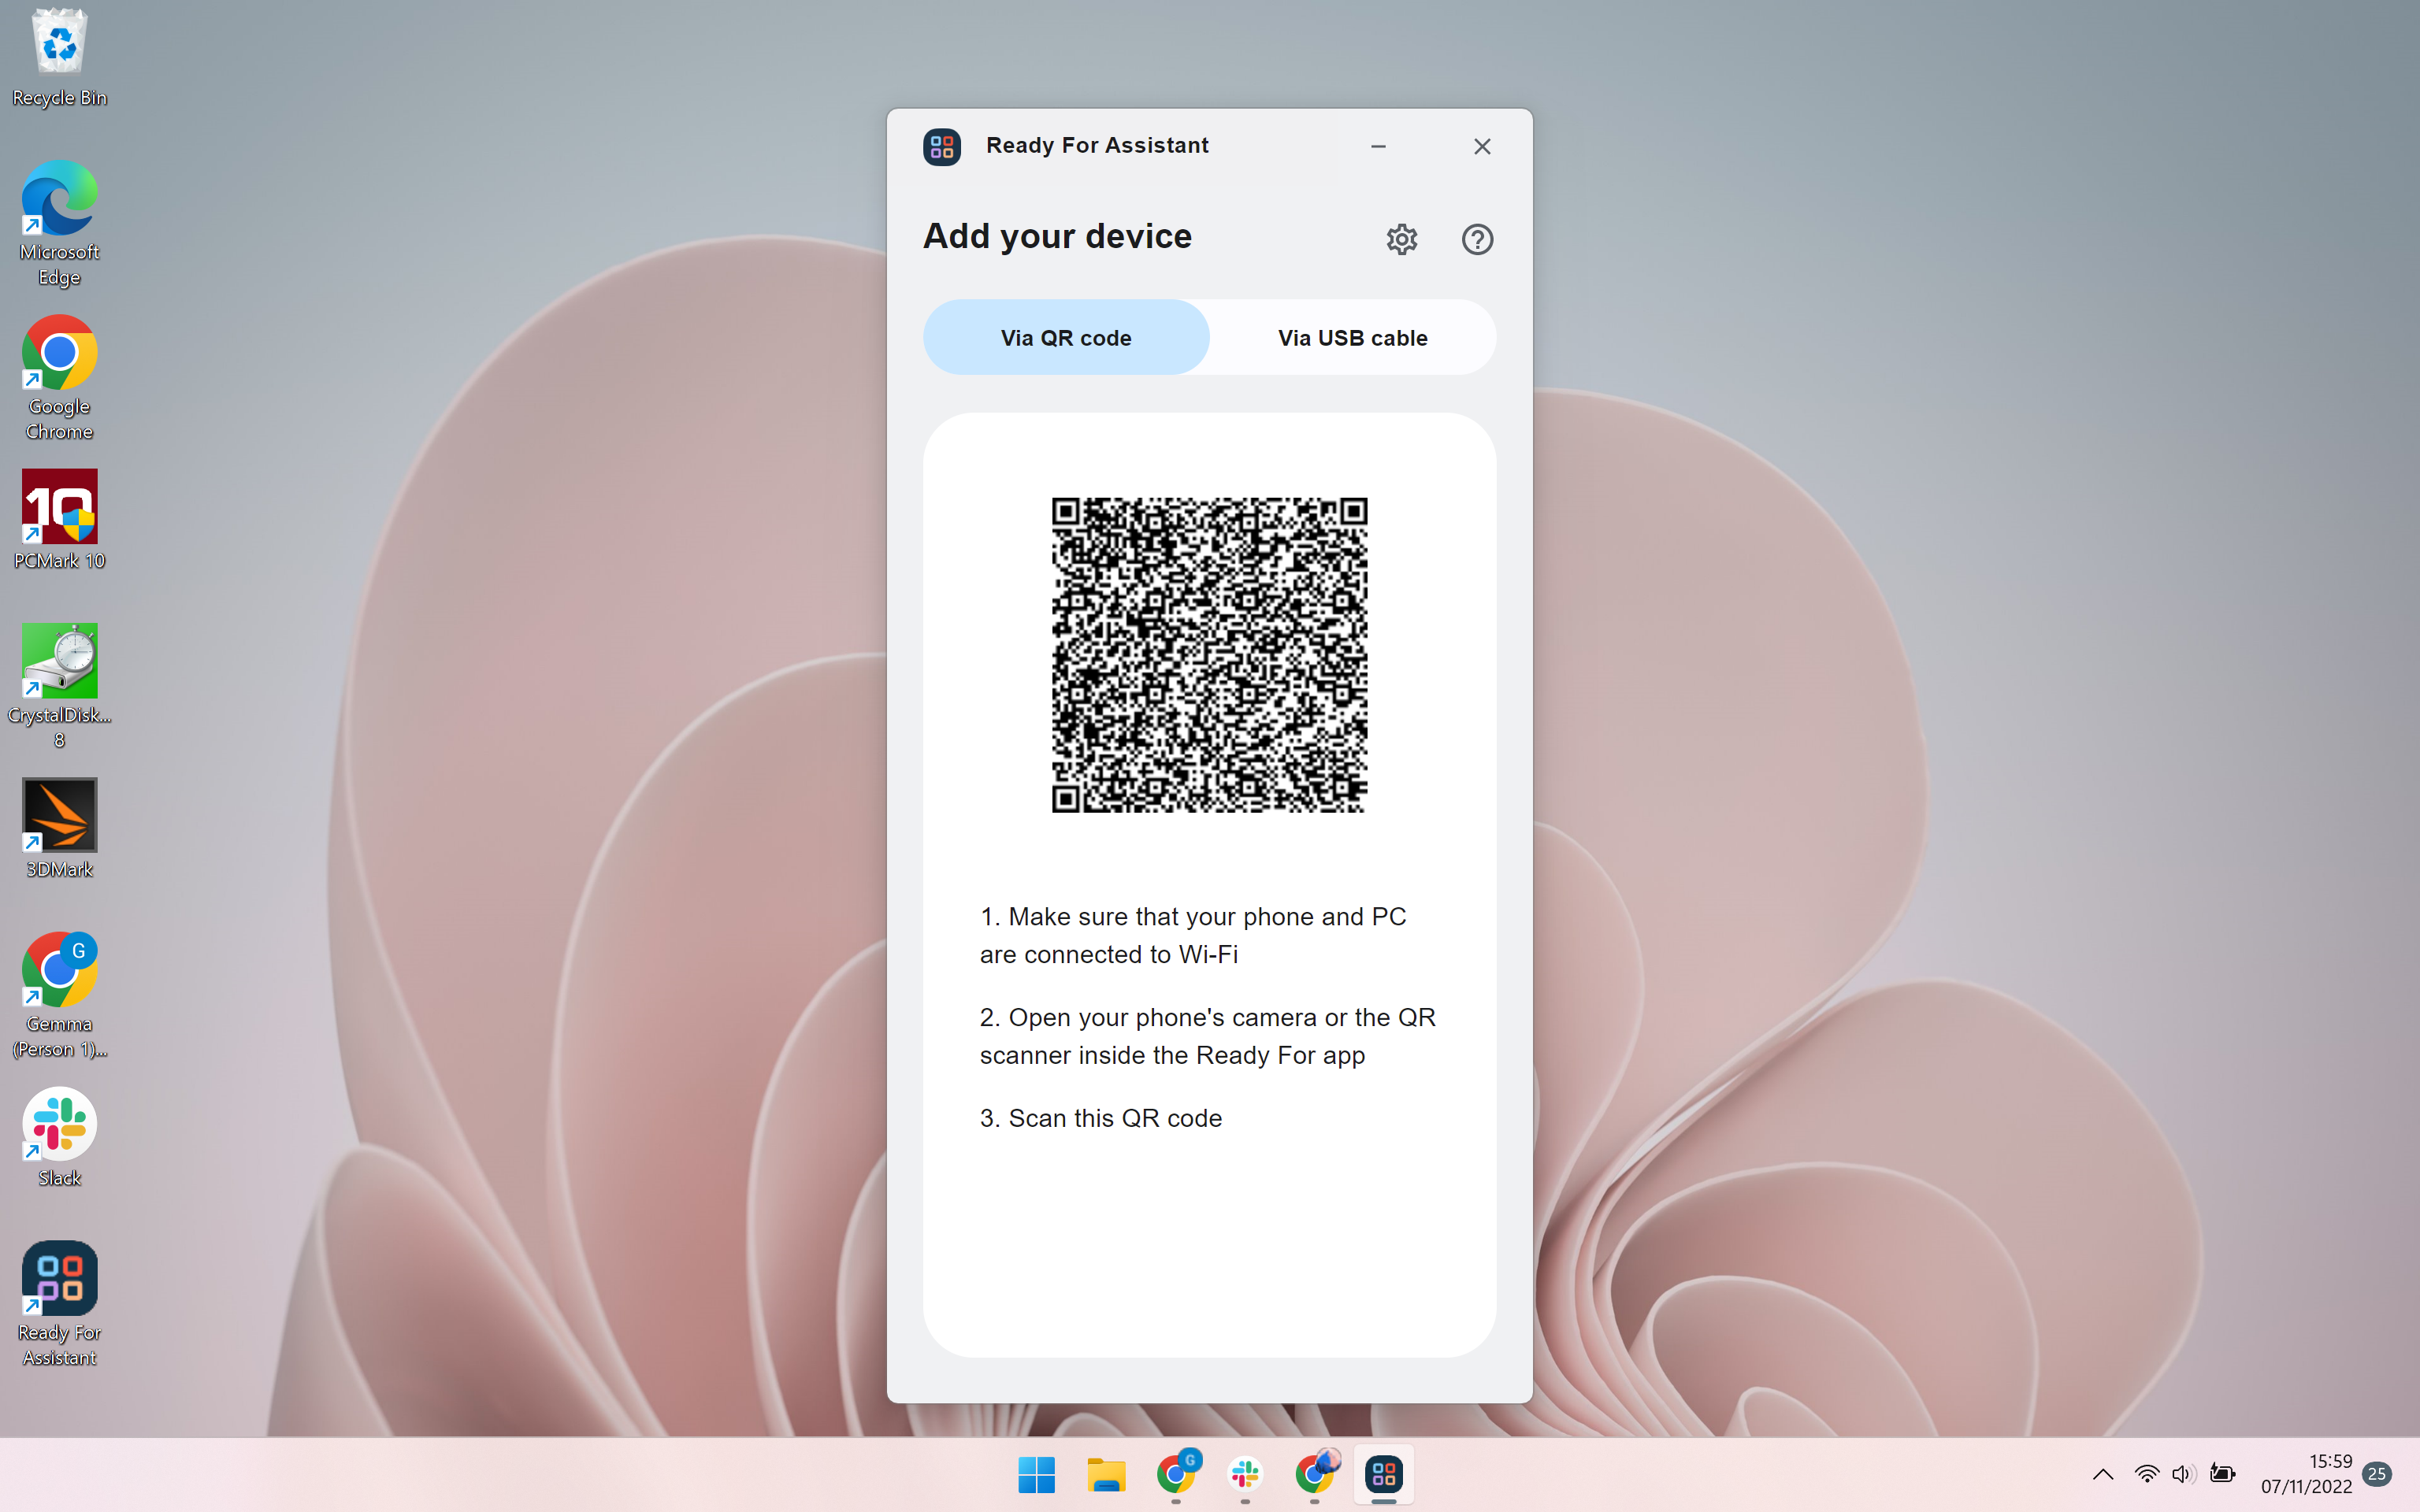 How to connect the Motorola Razr to a display using Ready For